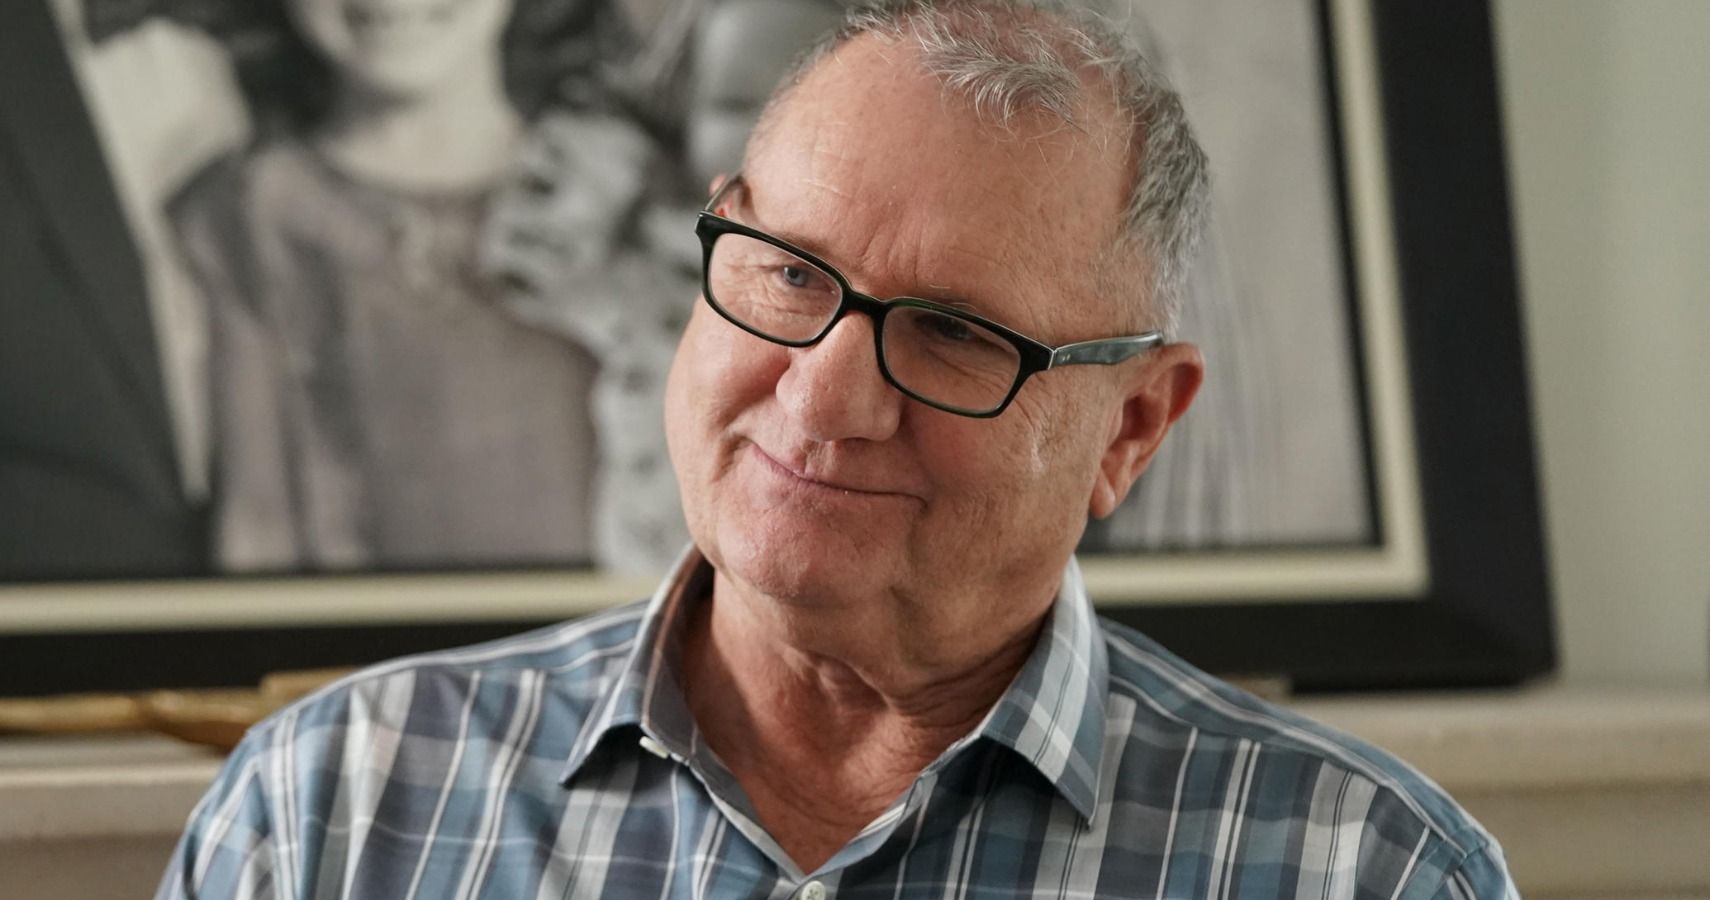 10 Things You Didn’t Know About Ed ONeill